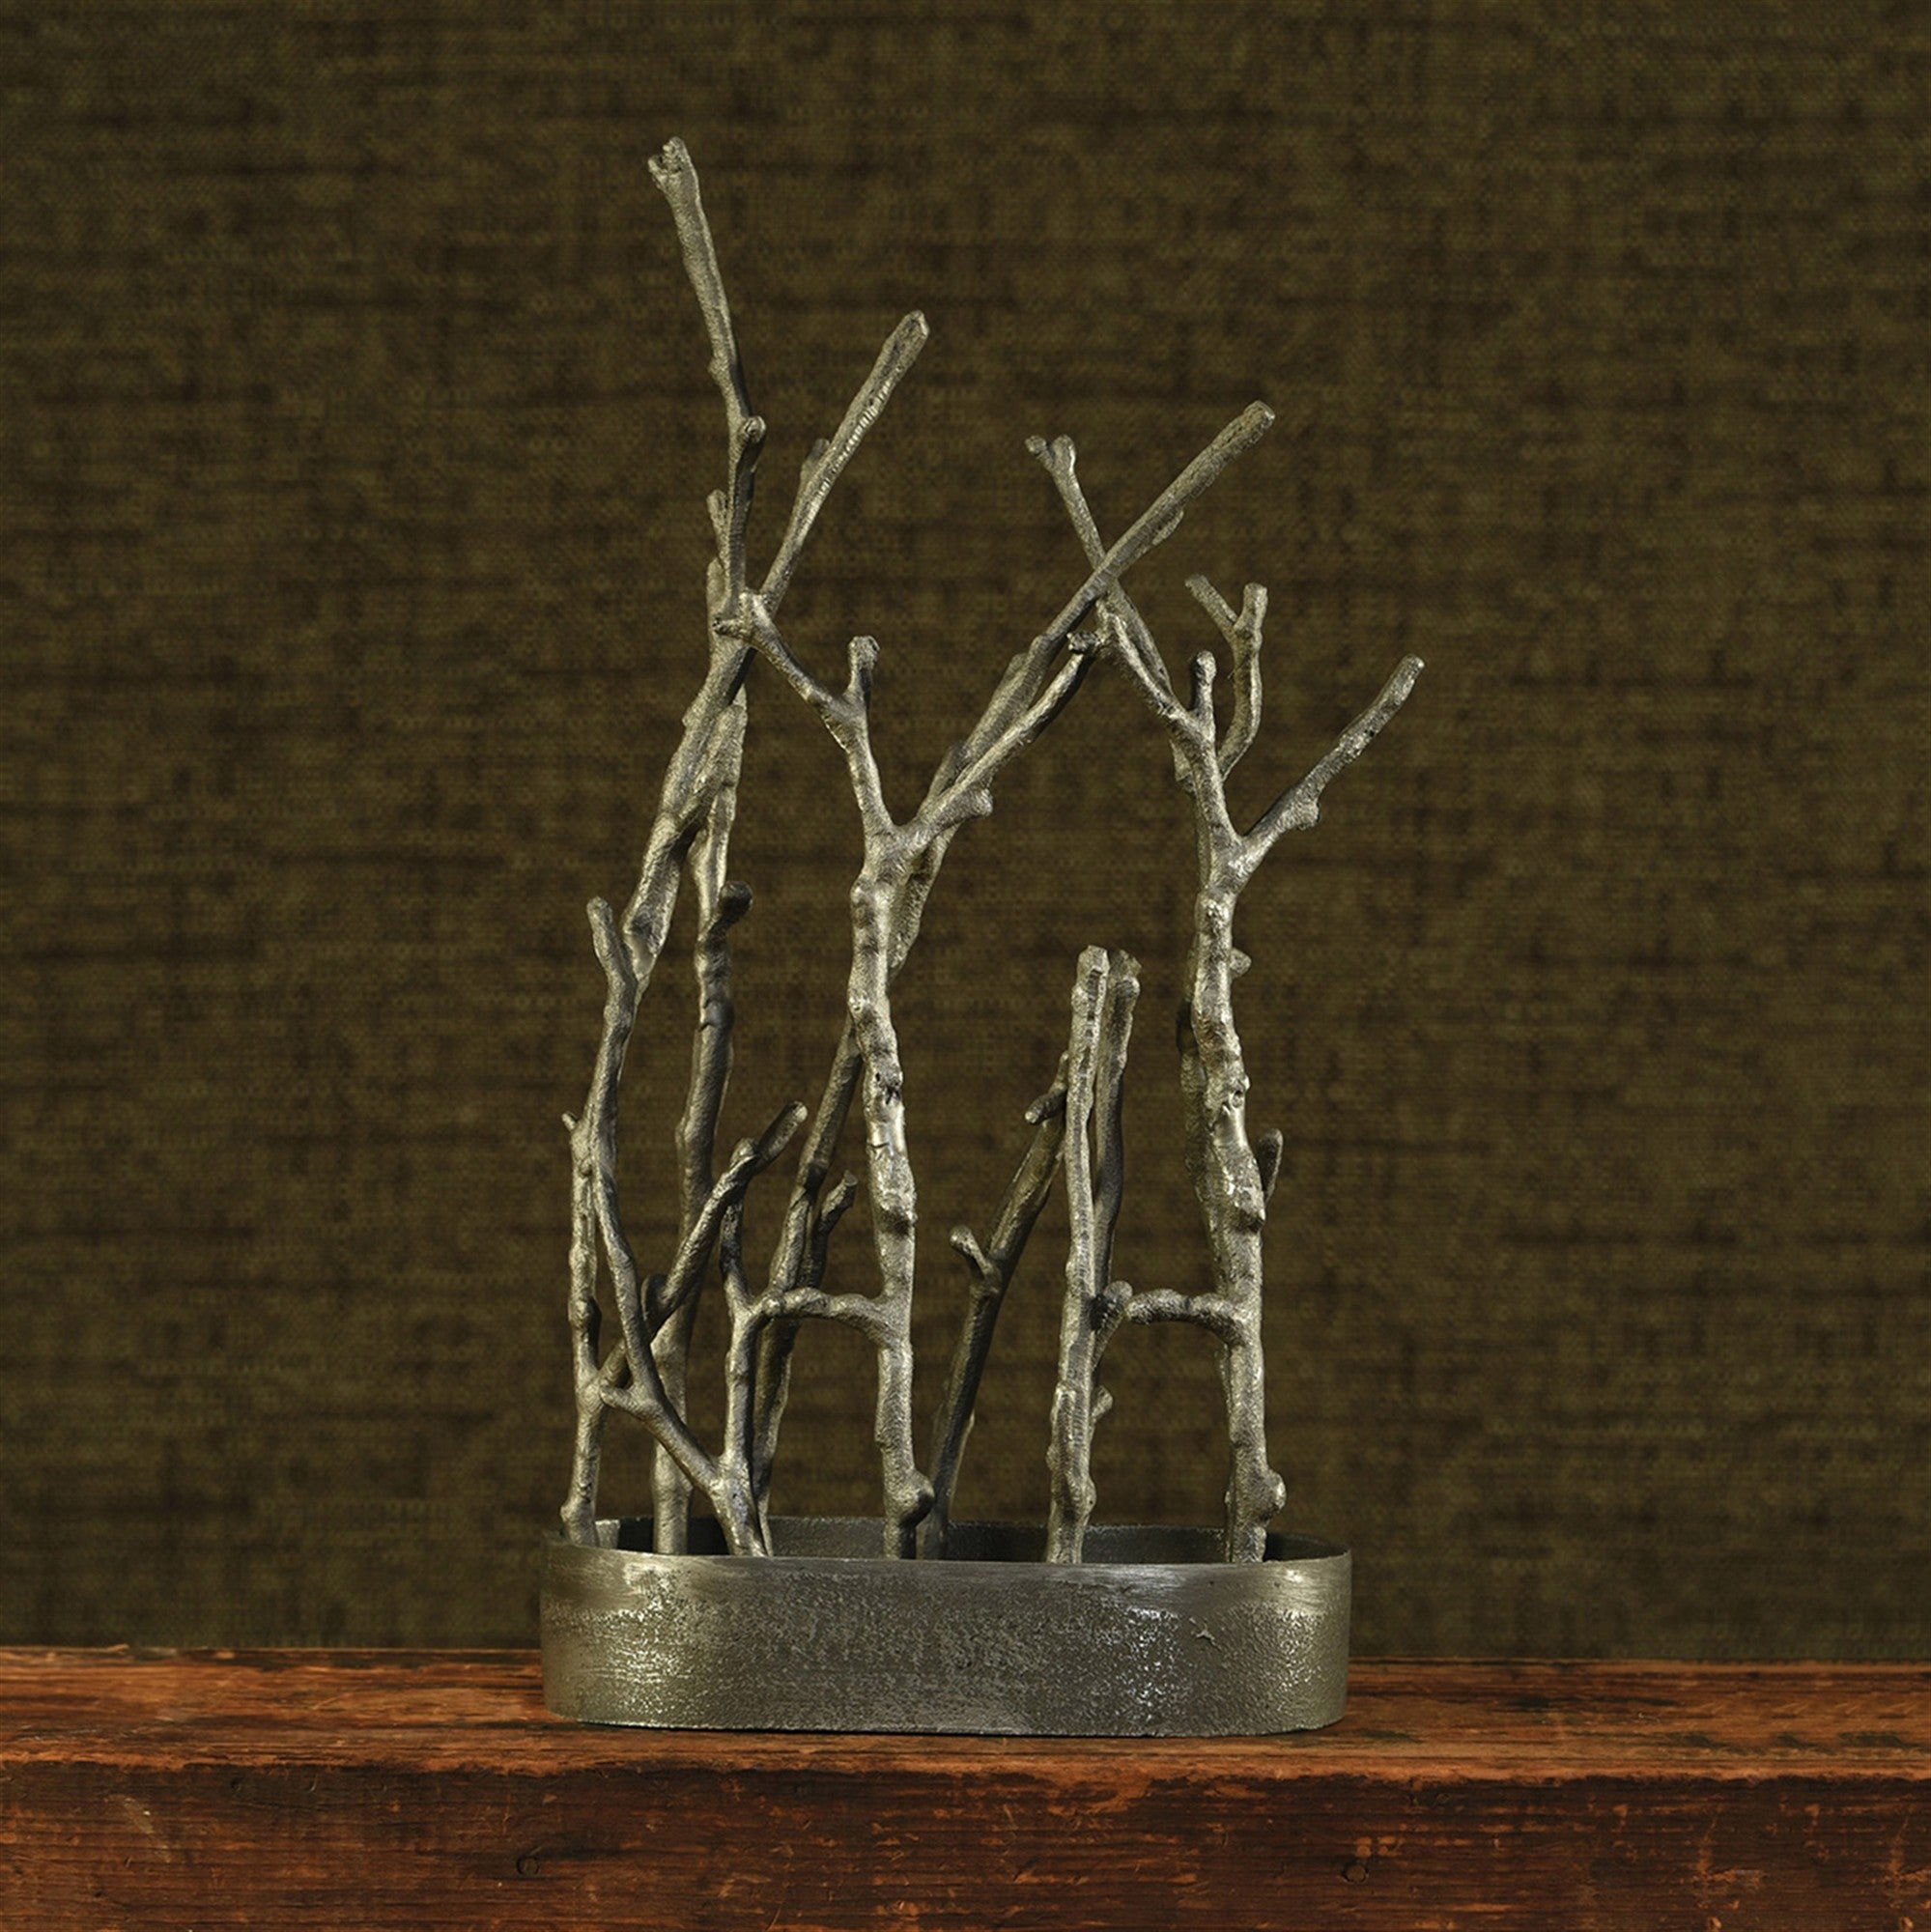 14" Gray Metal Tree Branches Tabletop Sculpture